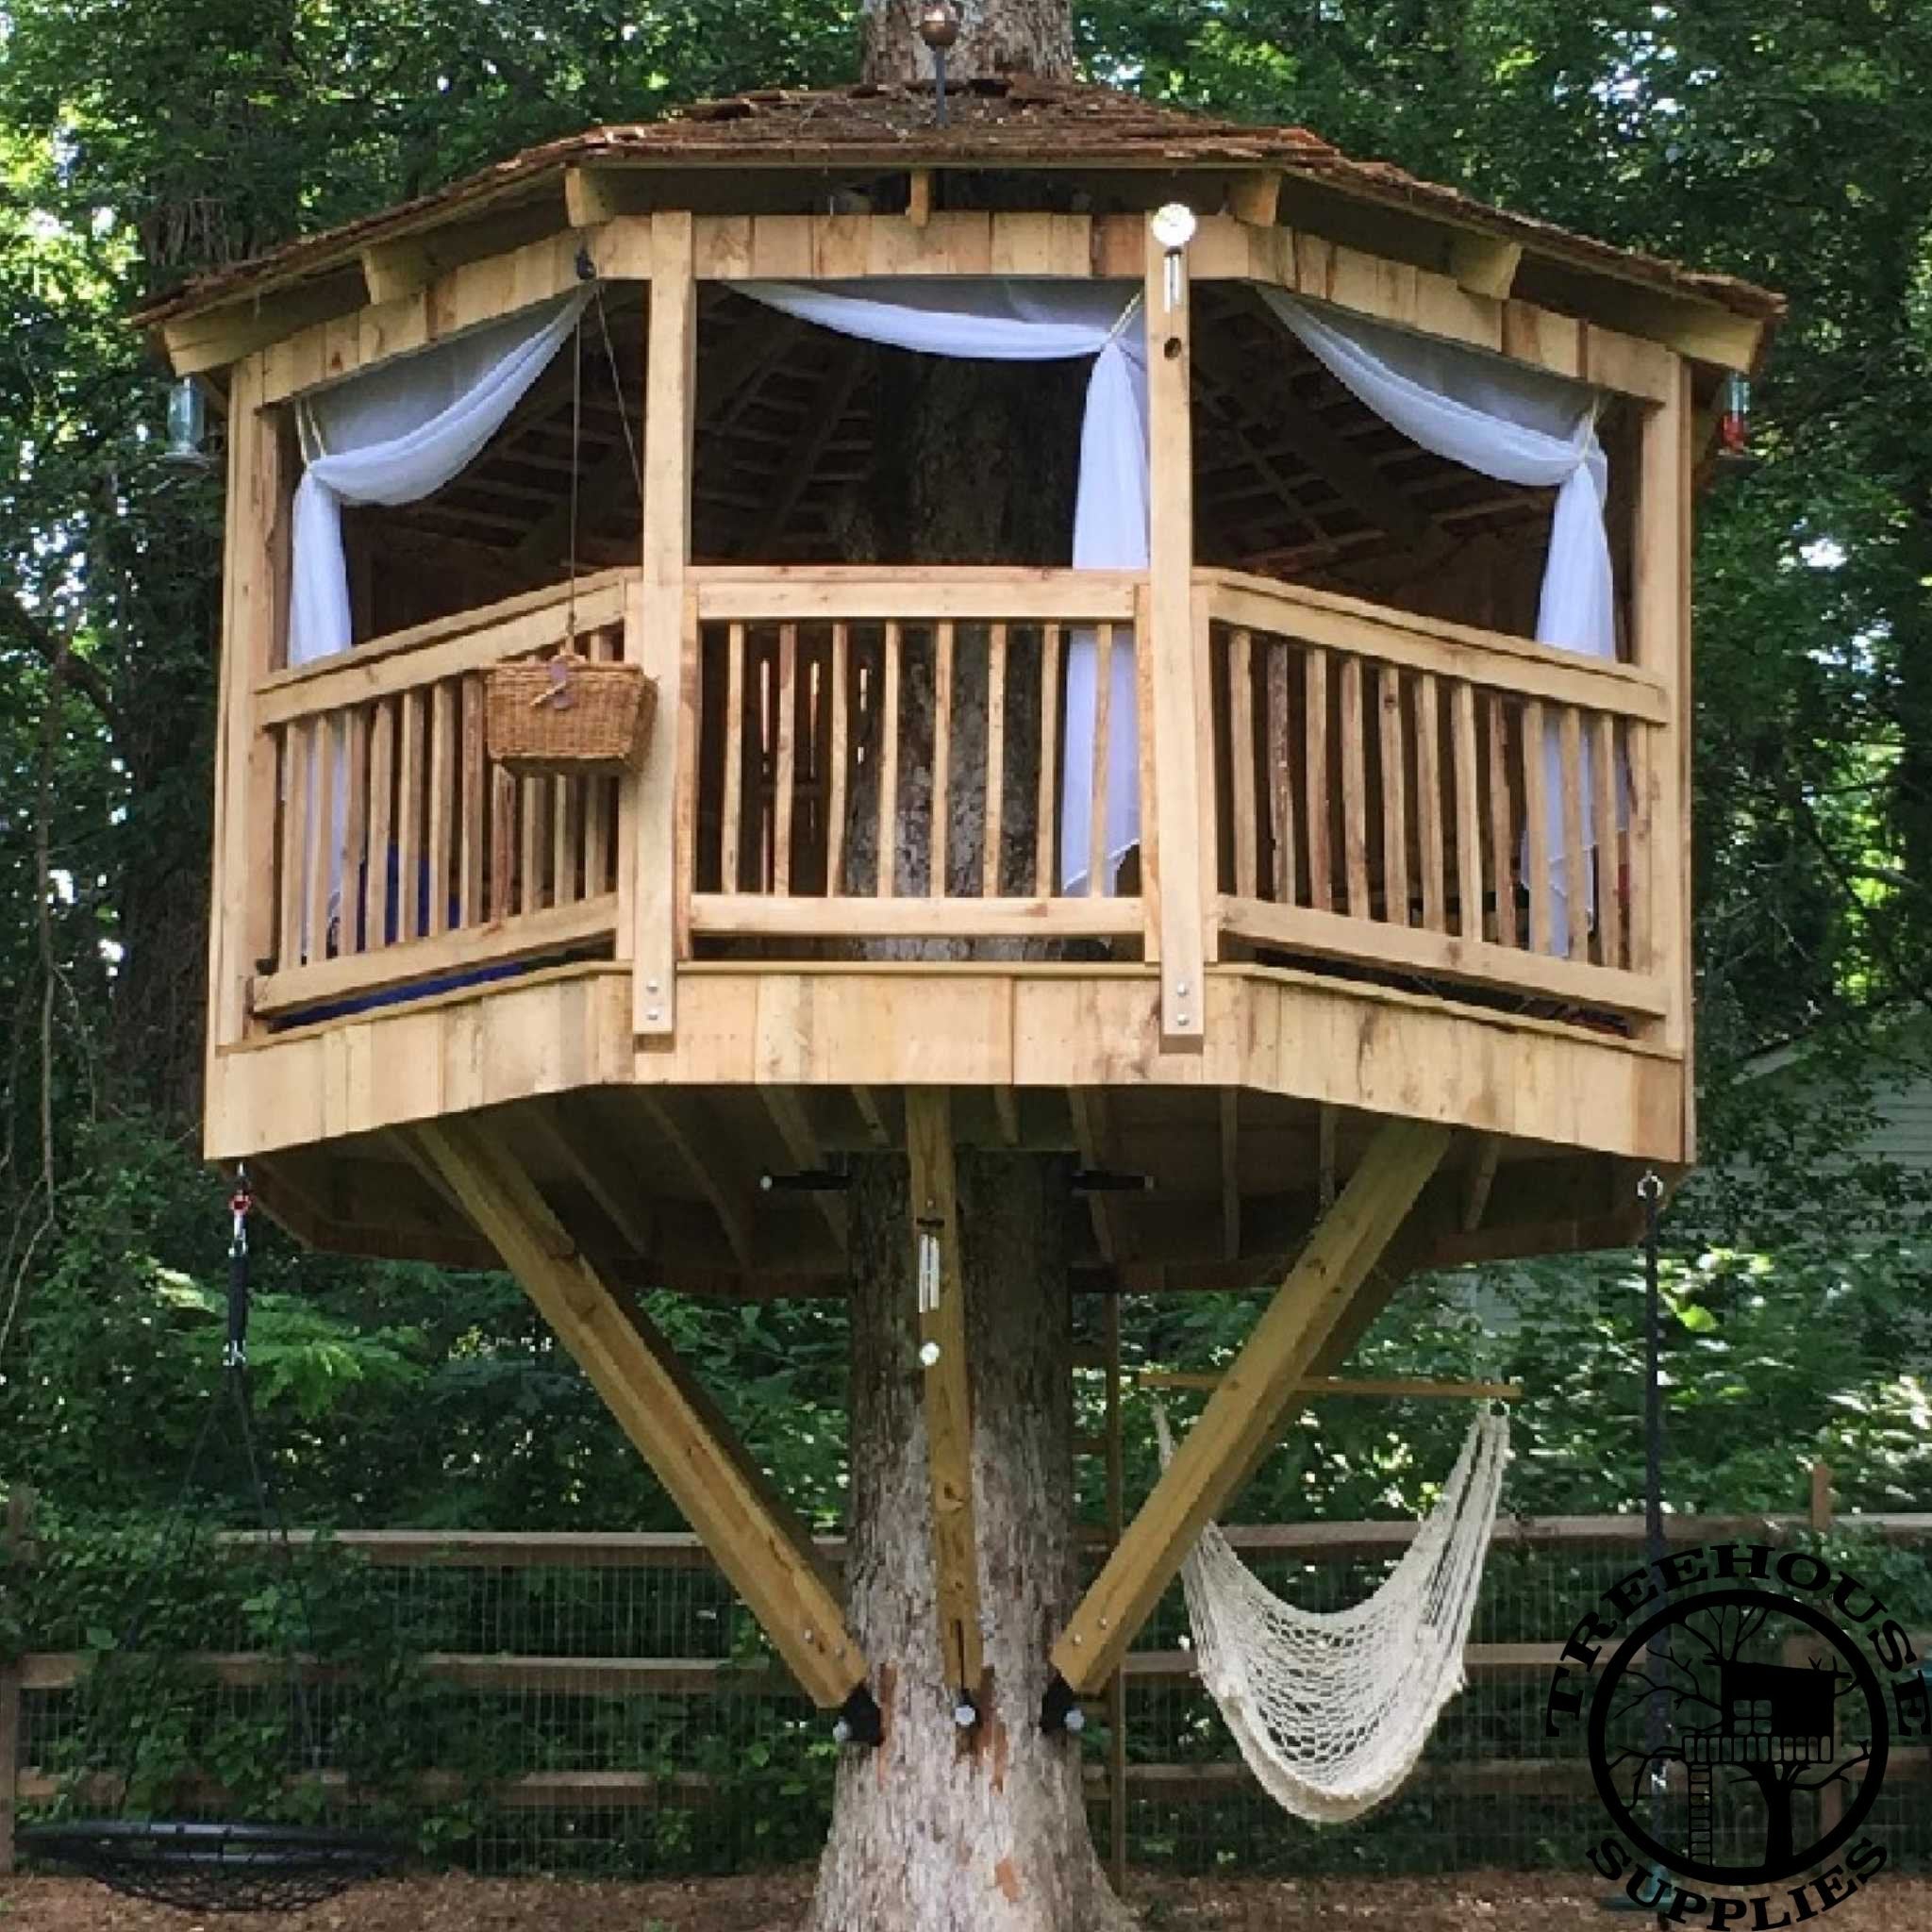 8' DIAMETER OCTAGONAL TREEHOUSE PLAN - NOW INCLUDES STEP-BY-STEP 3D MODELING!! - Treehouse Supplies